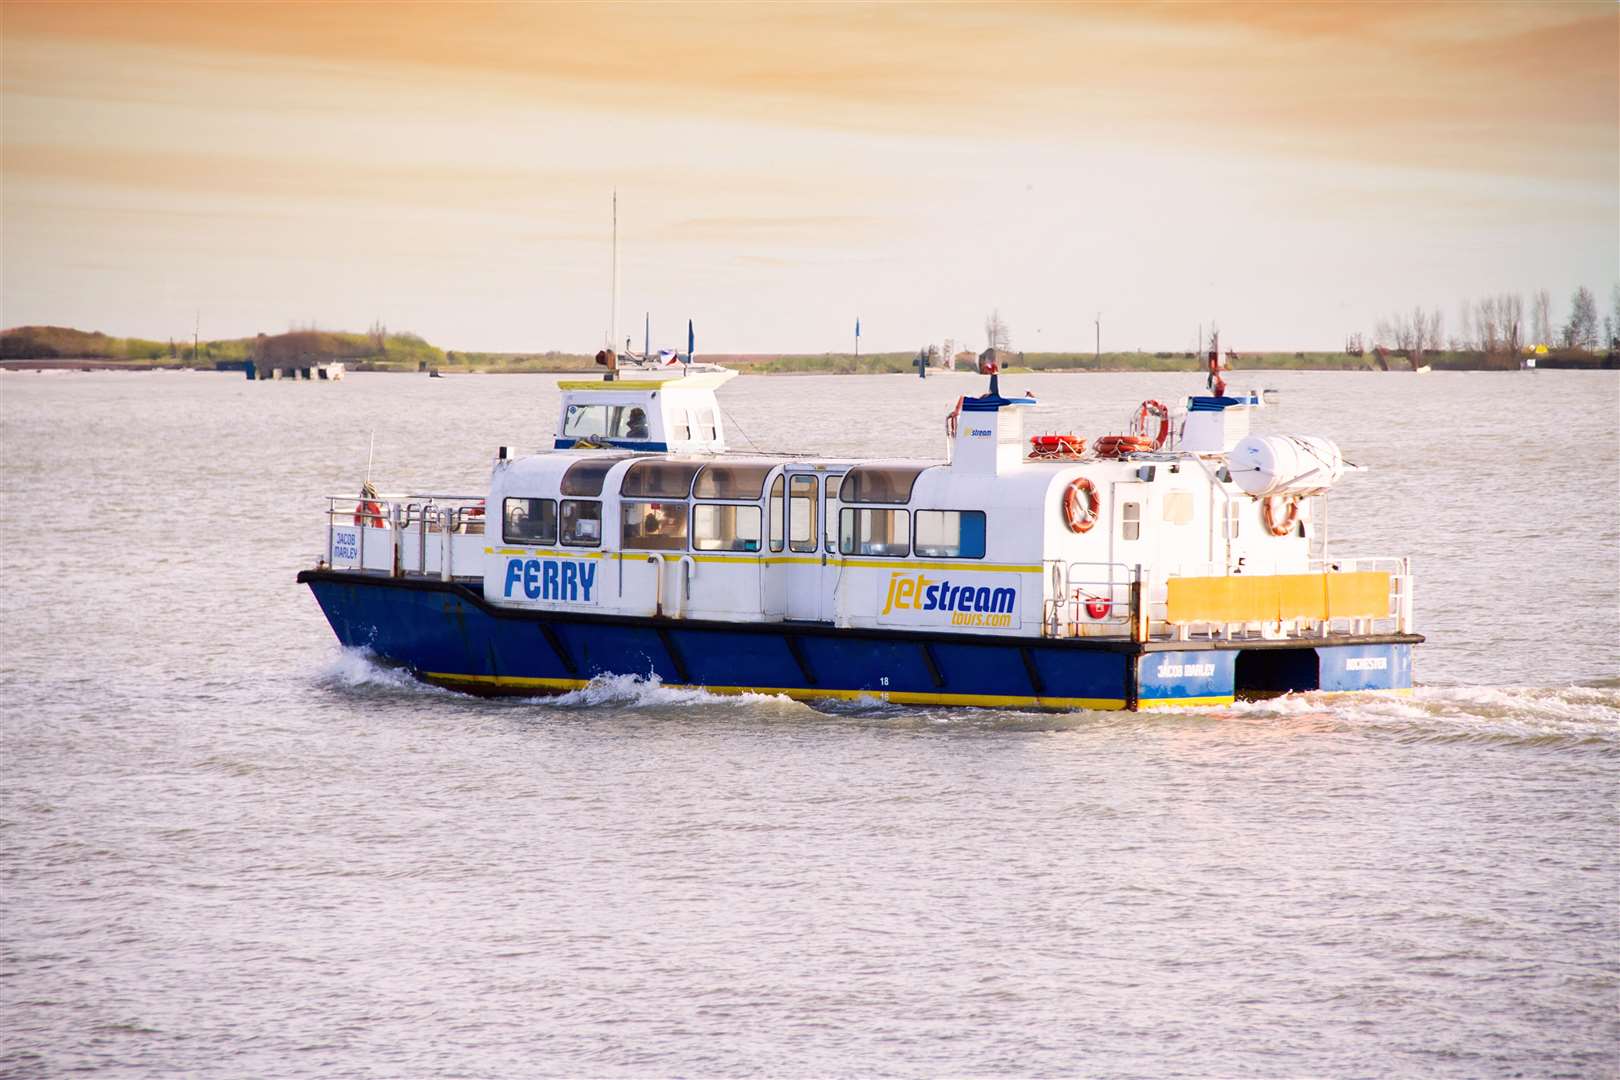 The journeys run from Gravesend Town Pier. Picture: Gravesham council